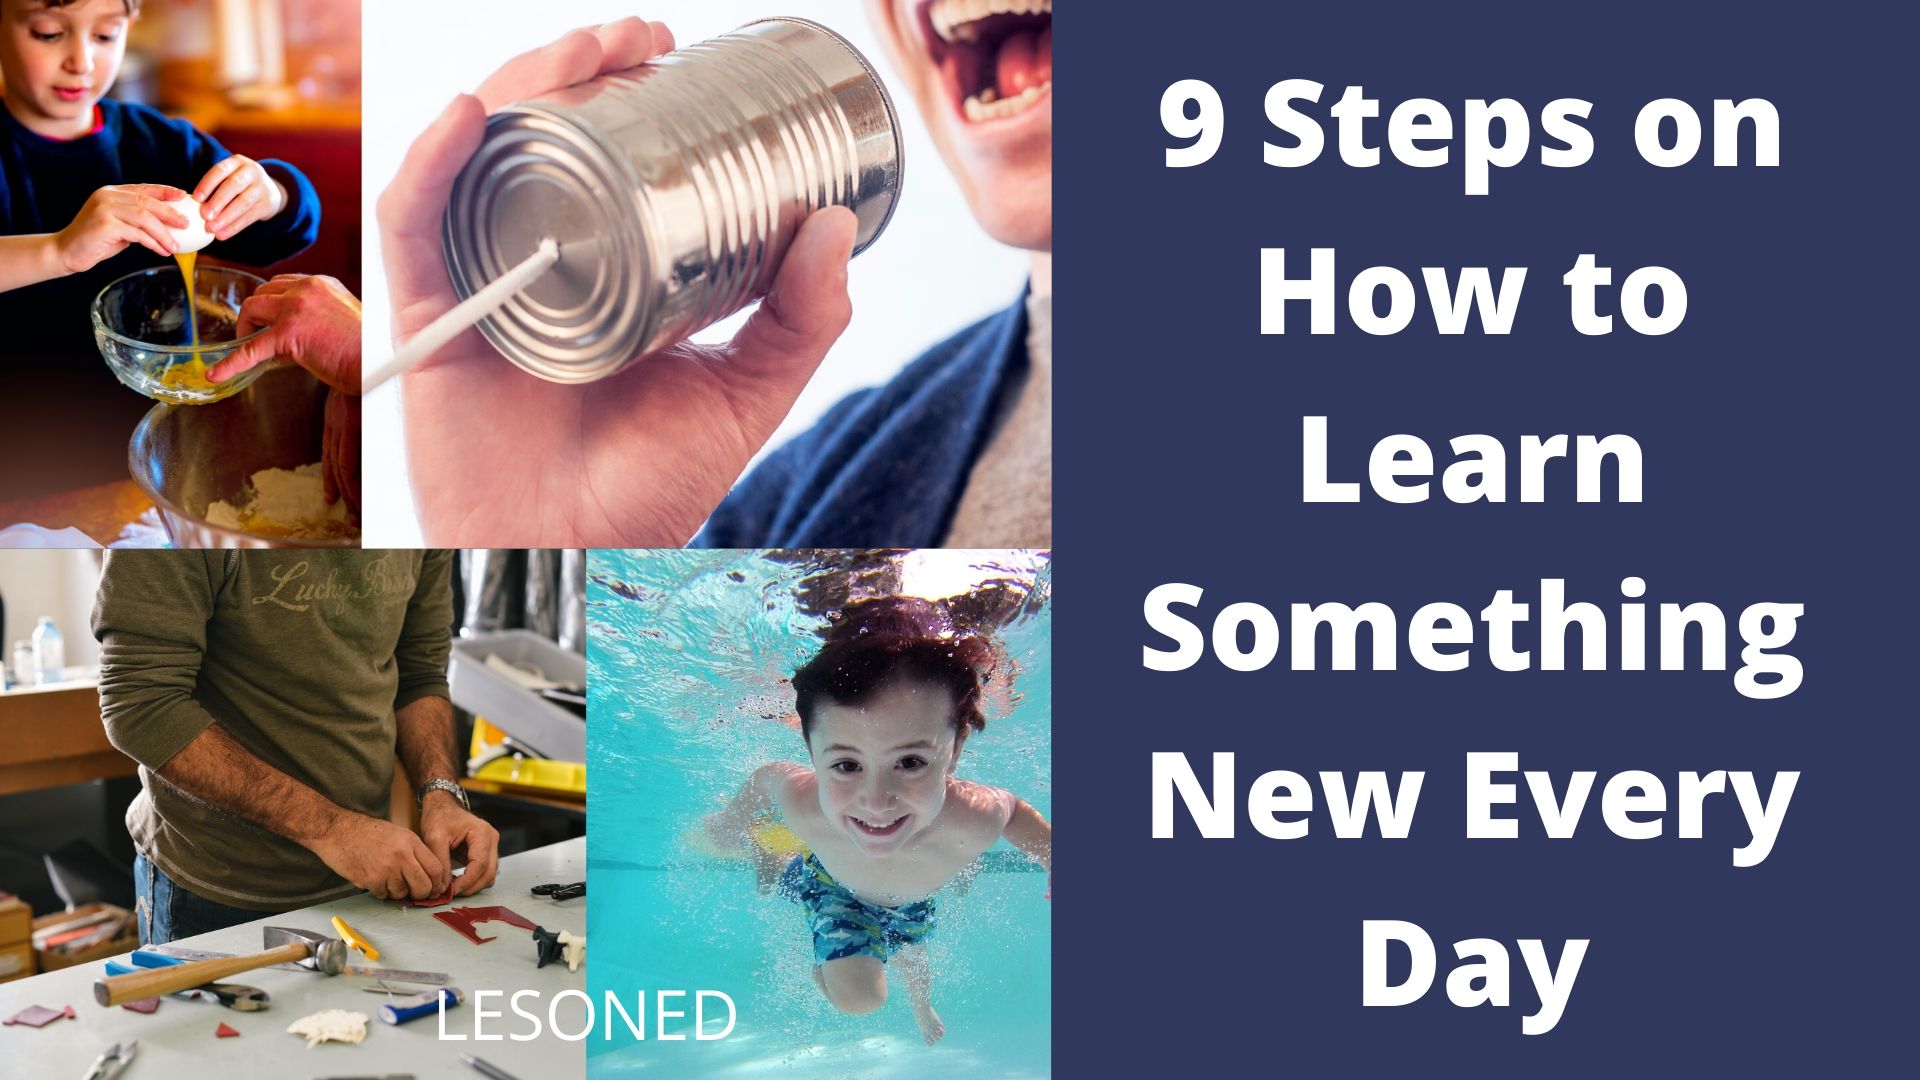 9 steps on how to learn something new and useful everyday